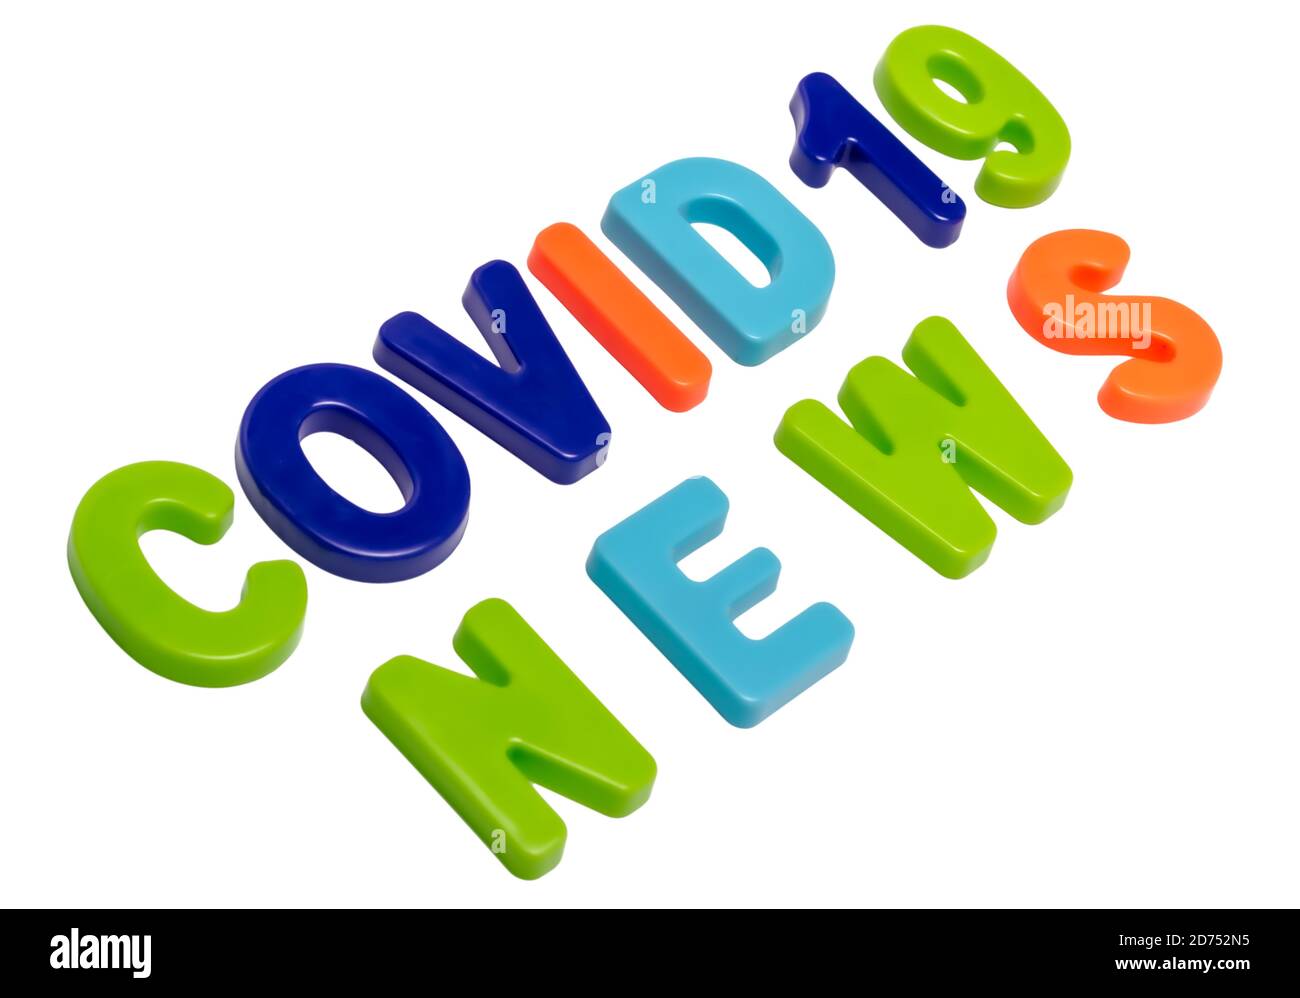 Coronavirus pandemic, text COVID-19 NEWS on a white background. News about the global pandemic COVID-19 is official the new name for coronavirus disea Stock Photo